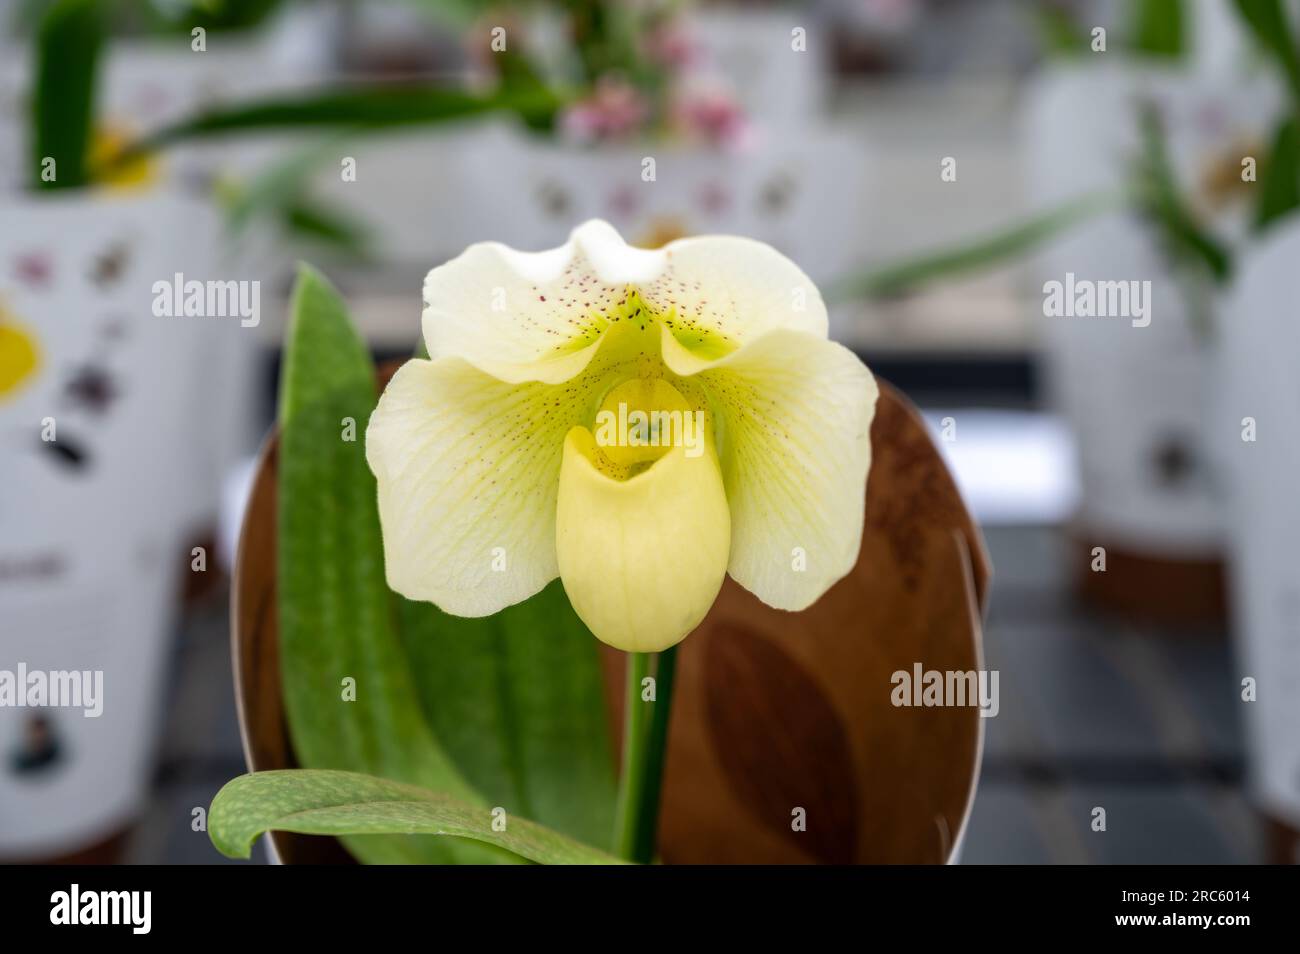 Cultivation of colorful tropical flowering plants orchid family Orchidaceae Paphiopedilum, Venus slipper in Dutch greenhouse with UV IR Grow Light Stock Photo